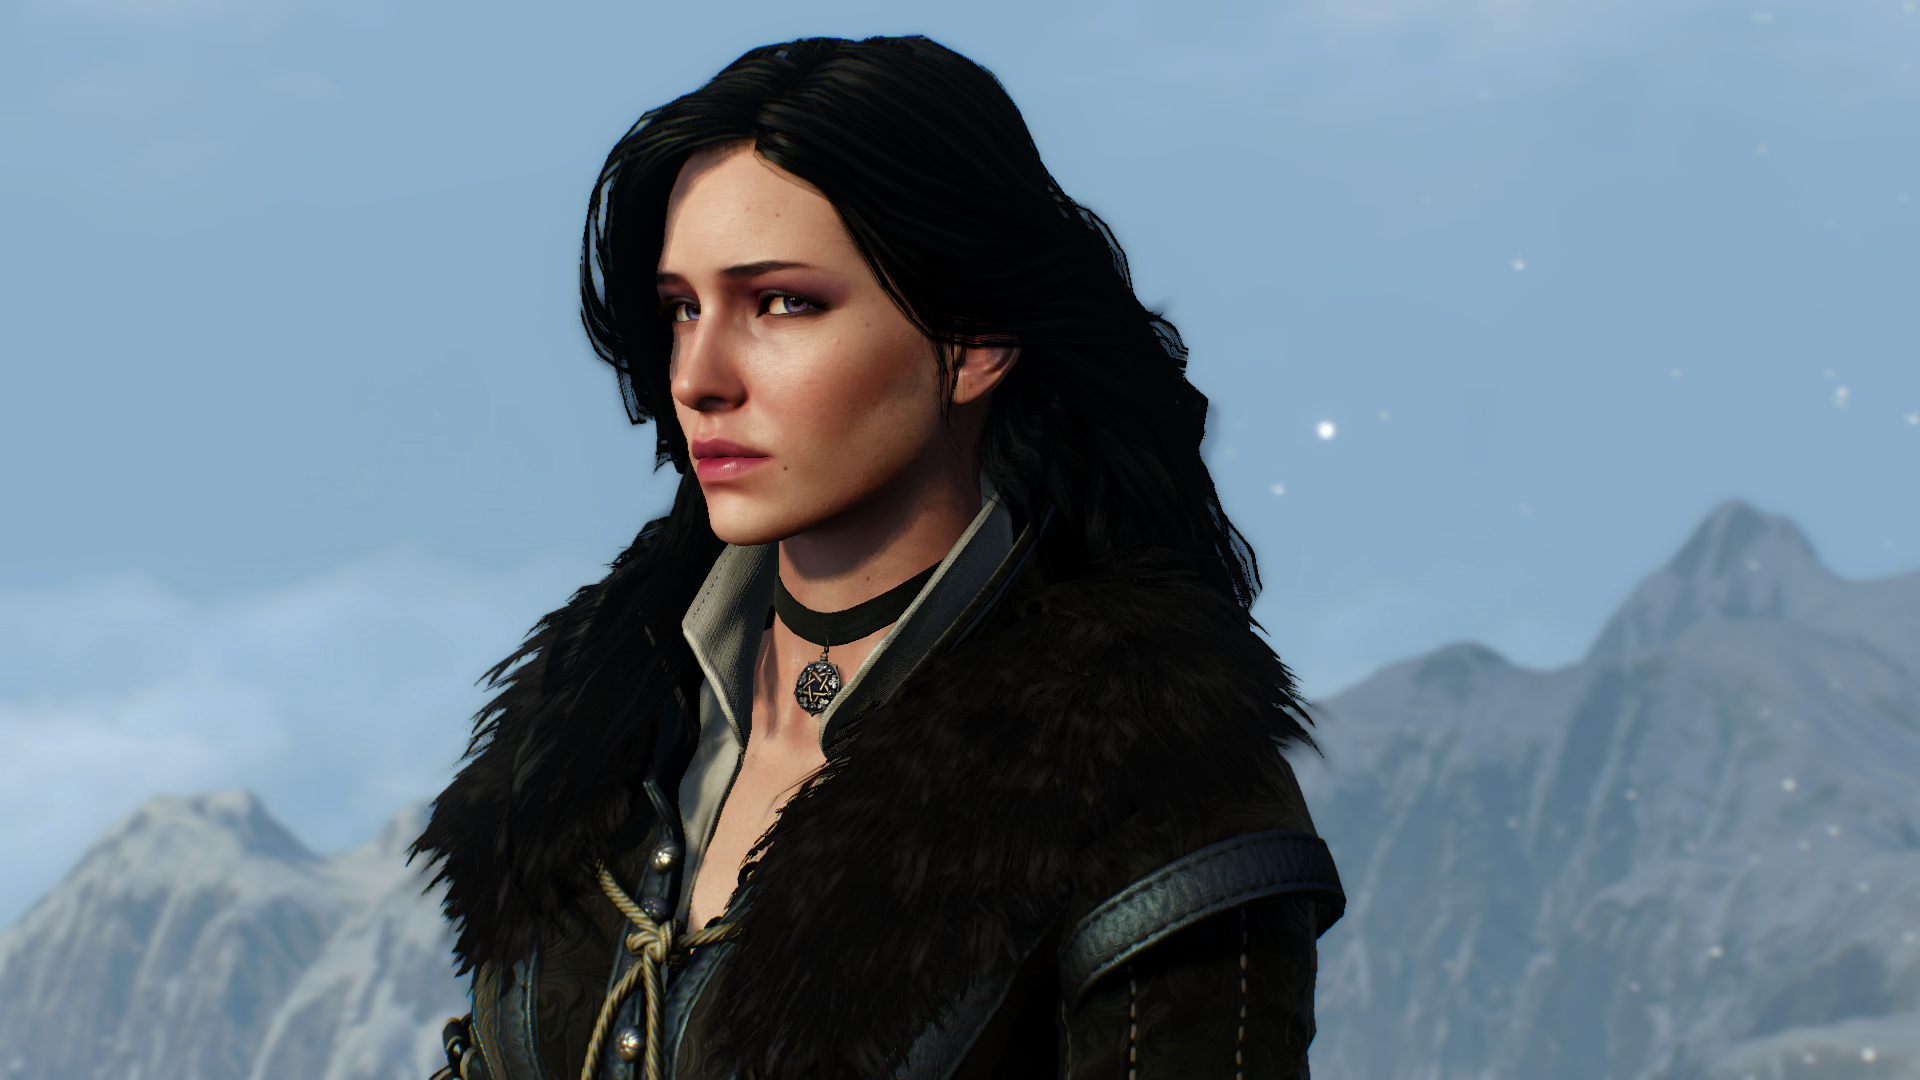 General 1920x1080 The Witcher 3: Wild Hunt screen shot Yennefer of Vengerberg video games video game characters CD Projekt RED